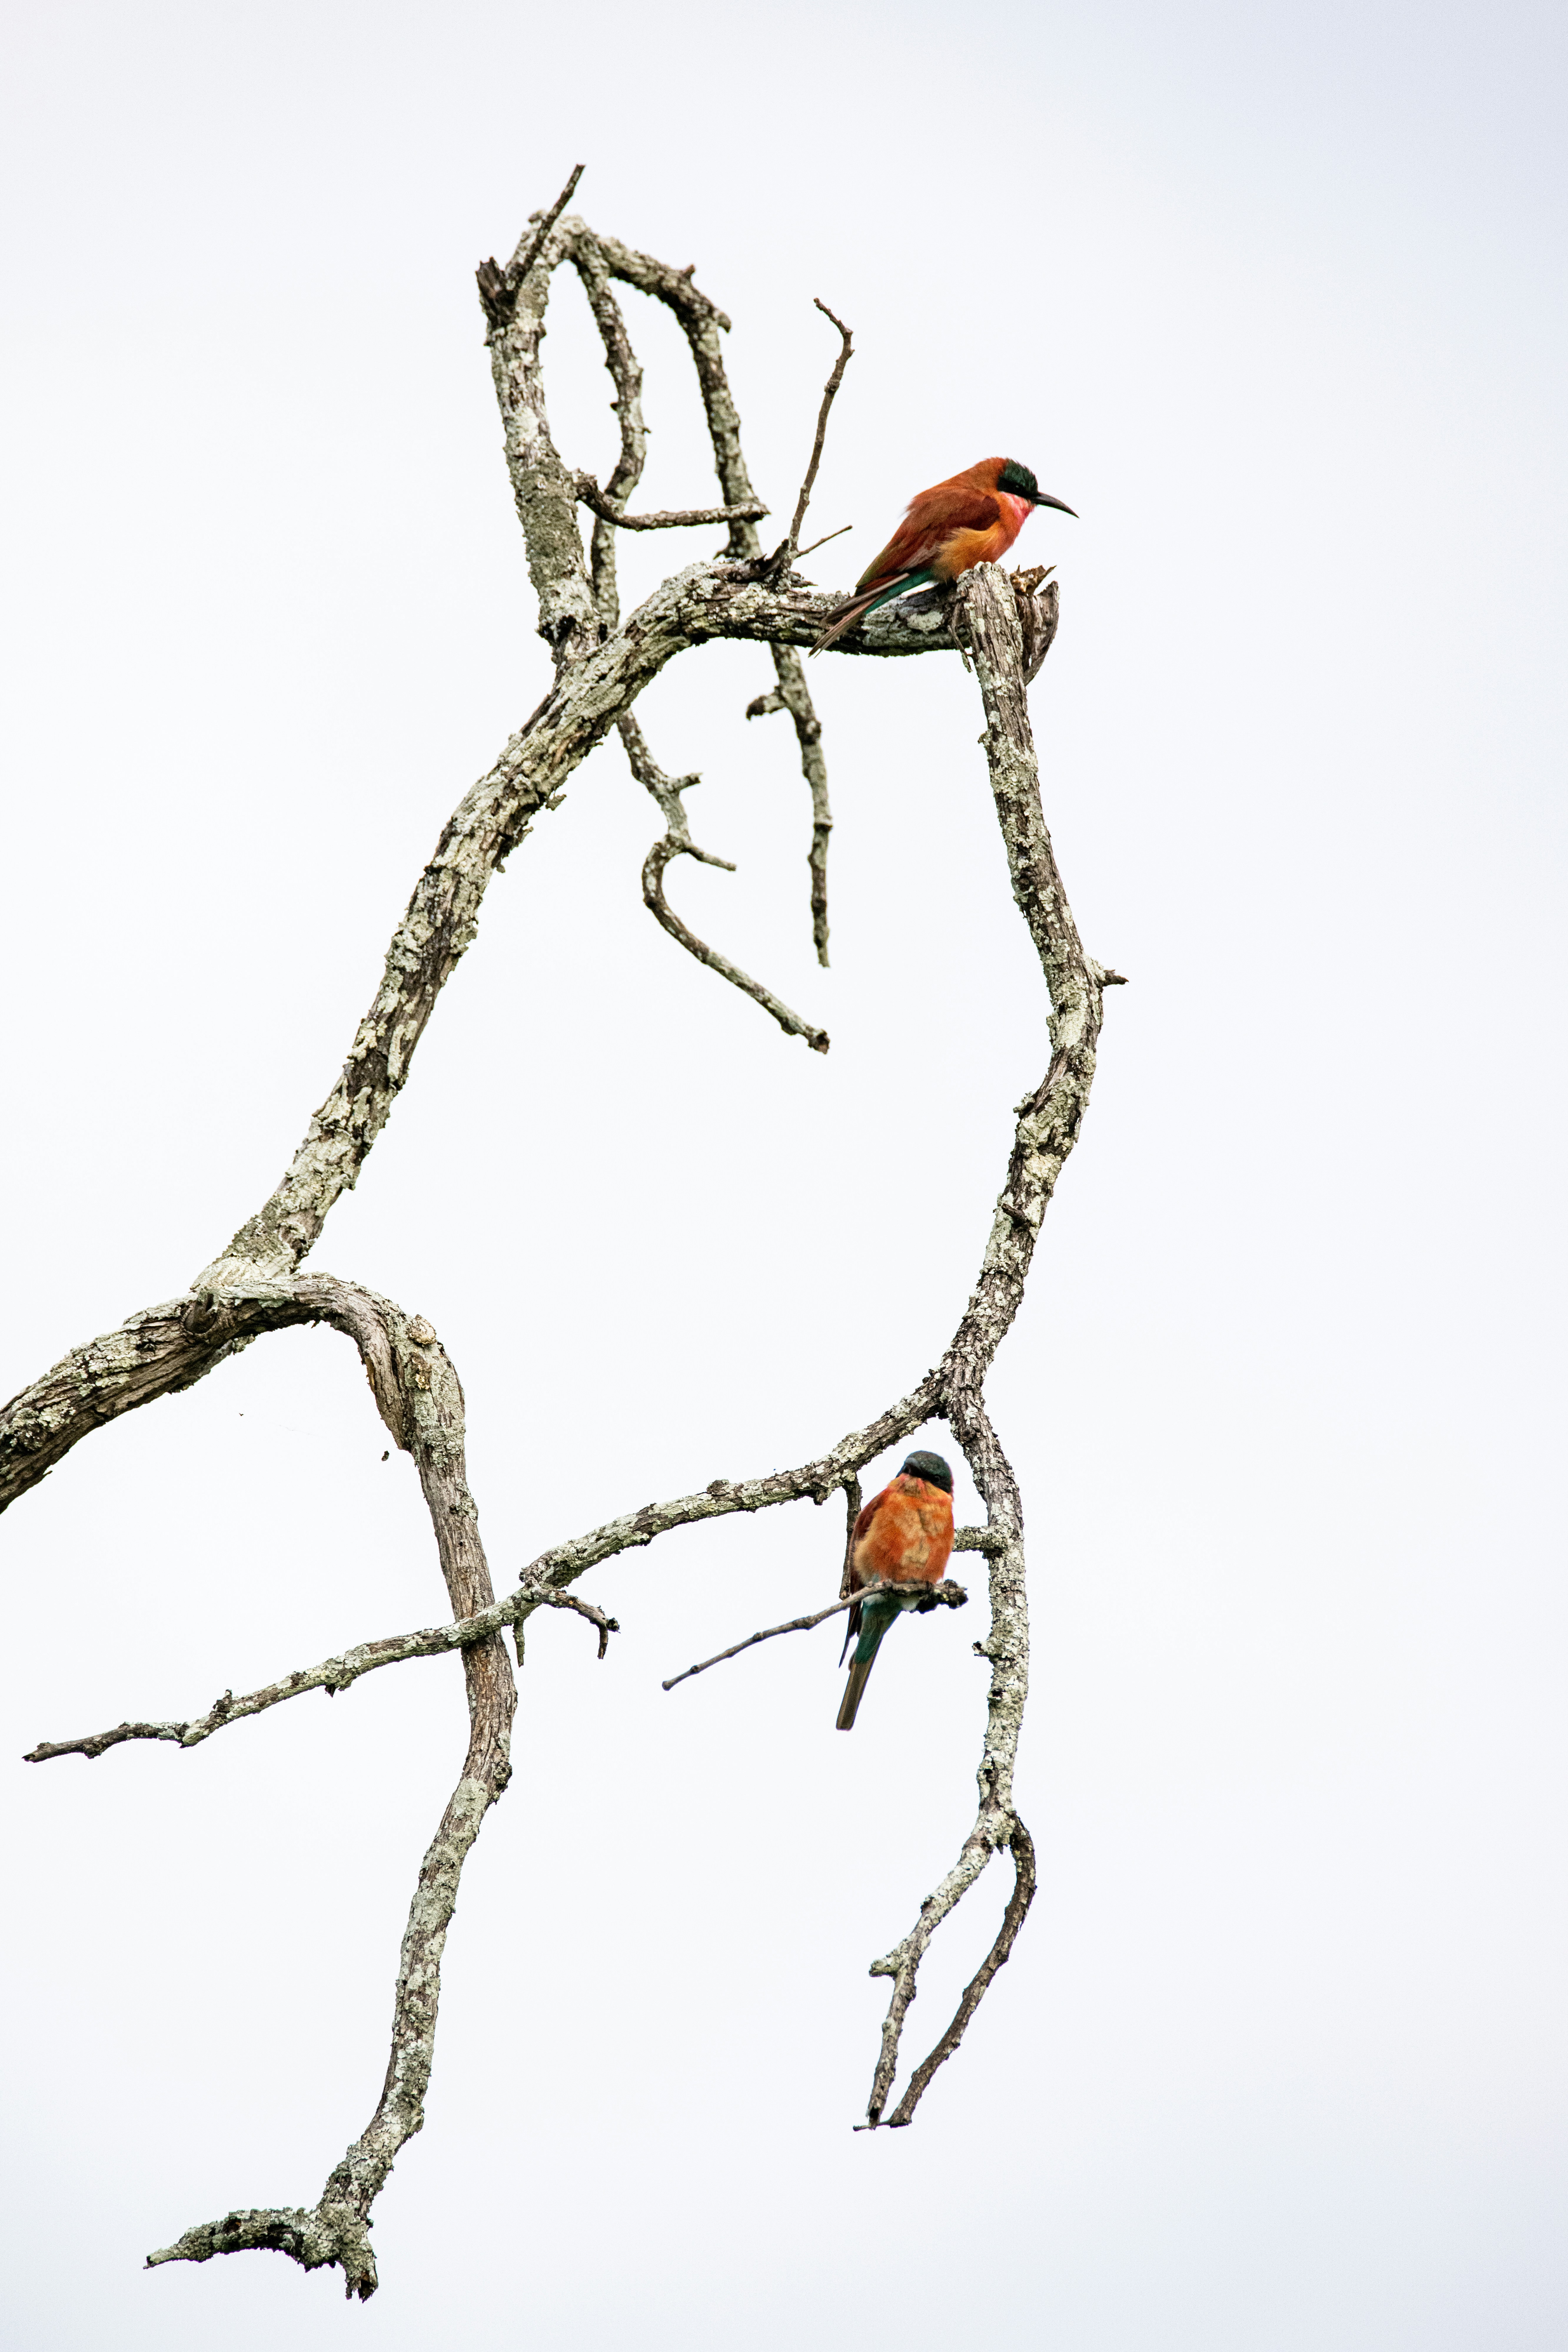 Carmine bee eaters, colorful African birds, on branch of a dead tree with white background